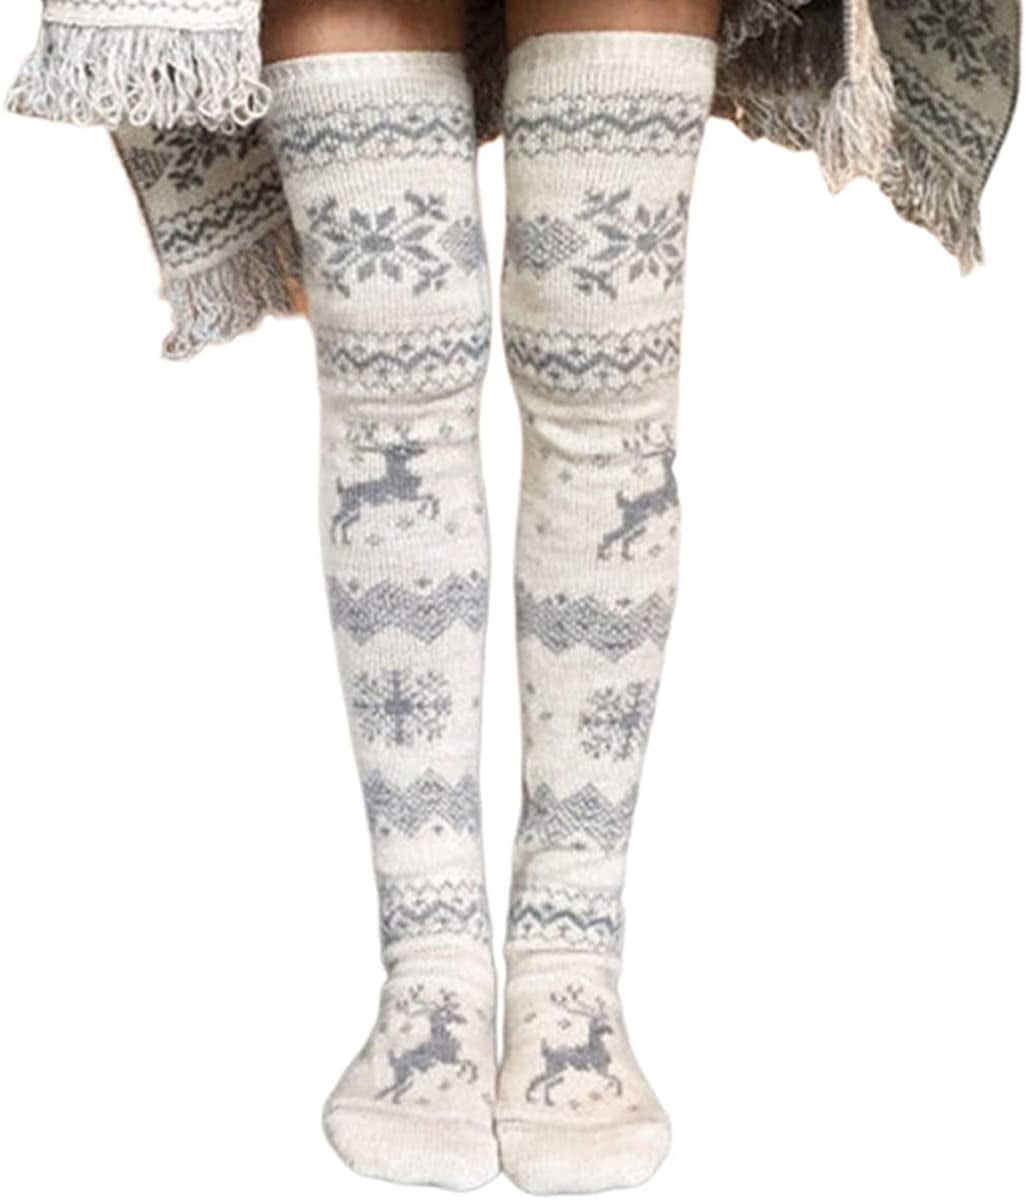 Huyghdfb Womens Warm Thigh High Woolen Socks Knitted Over The Knee Socks 26 Long Knee High Socks for Women Grey, One Size 